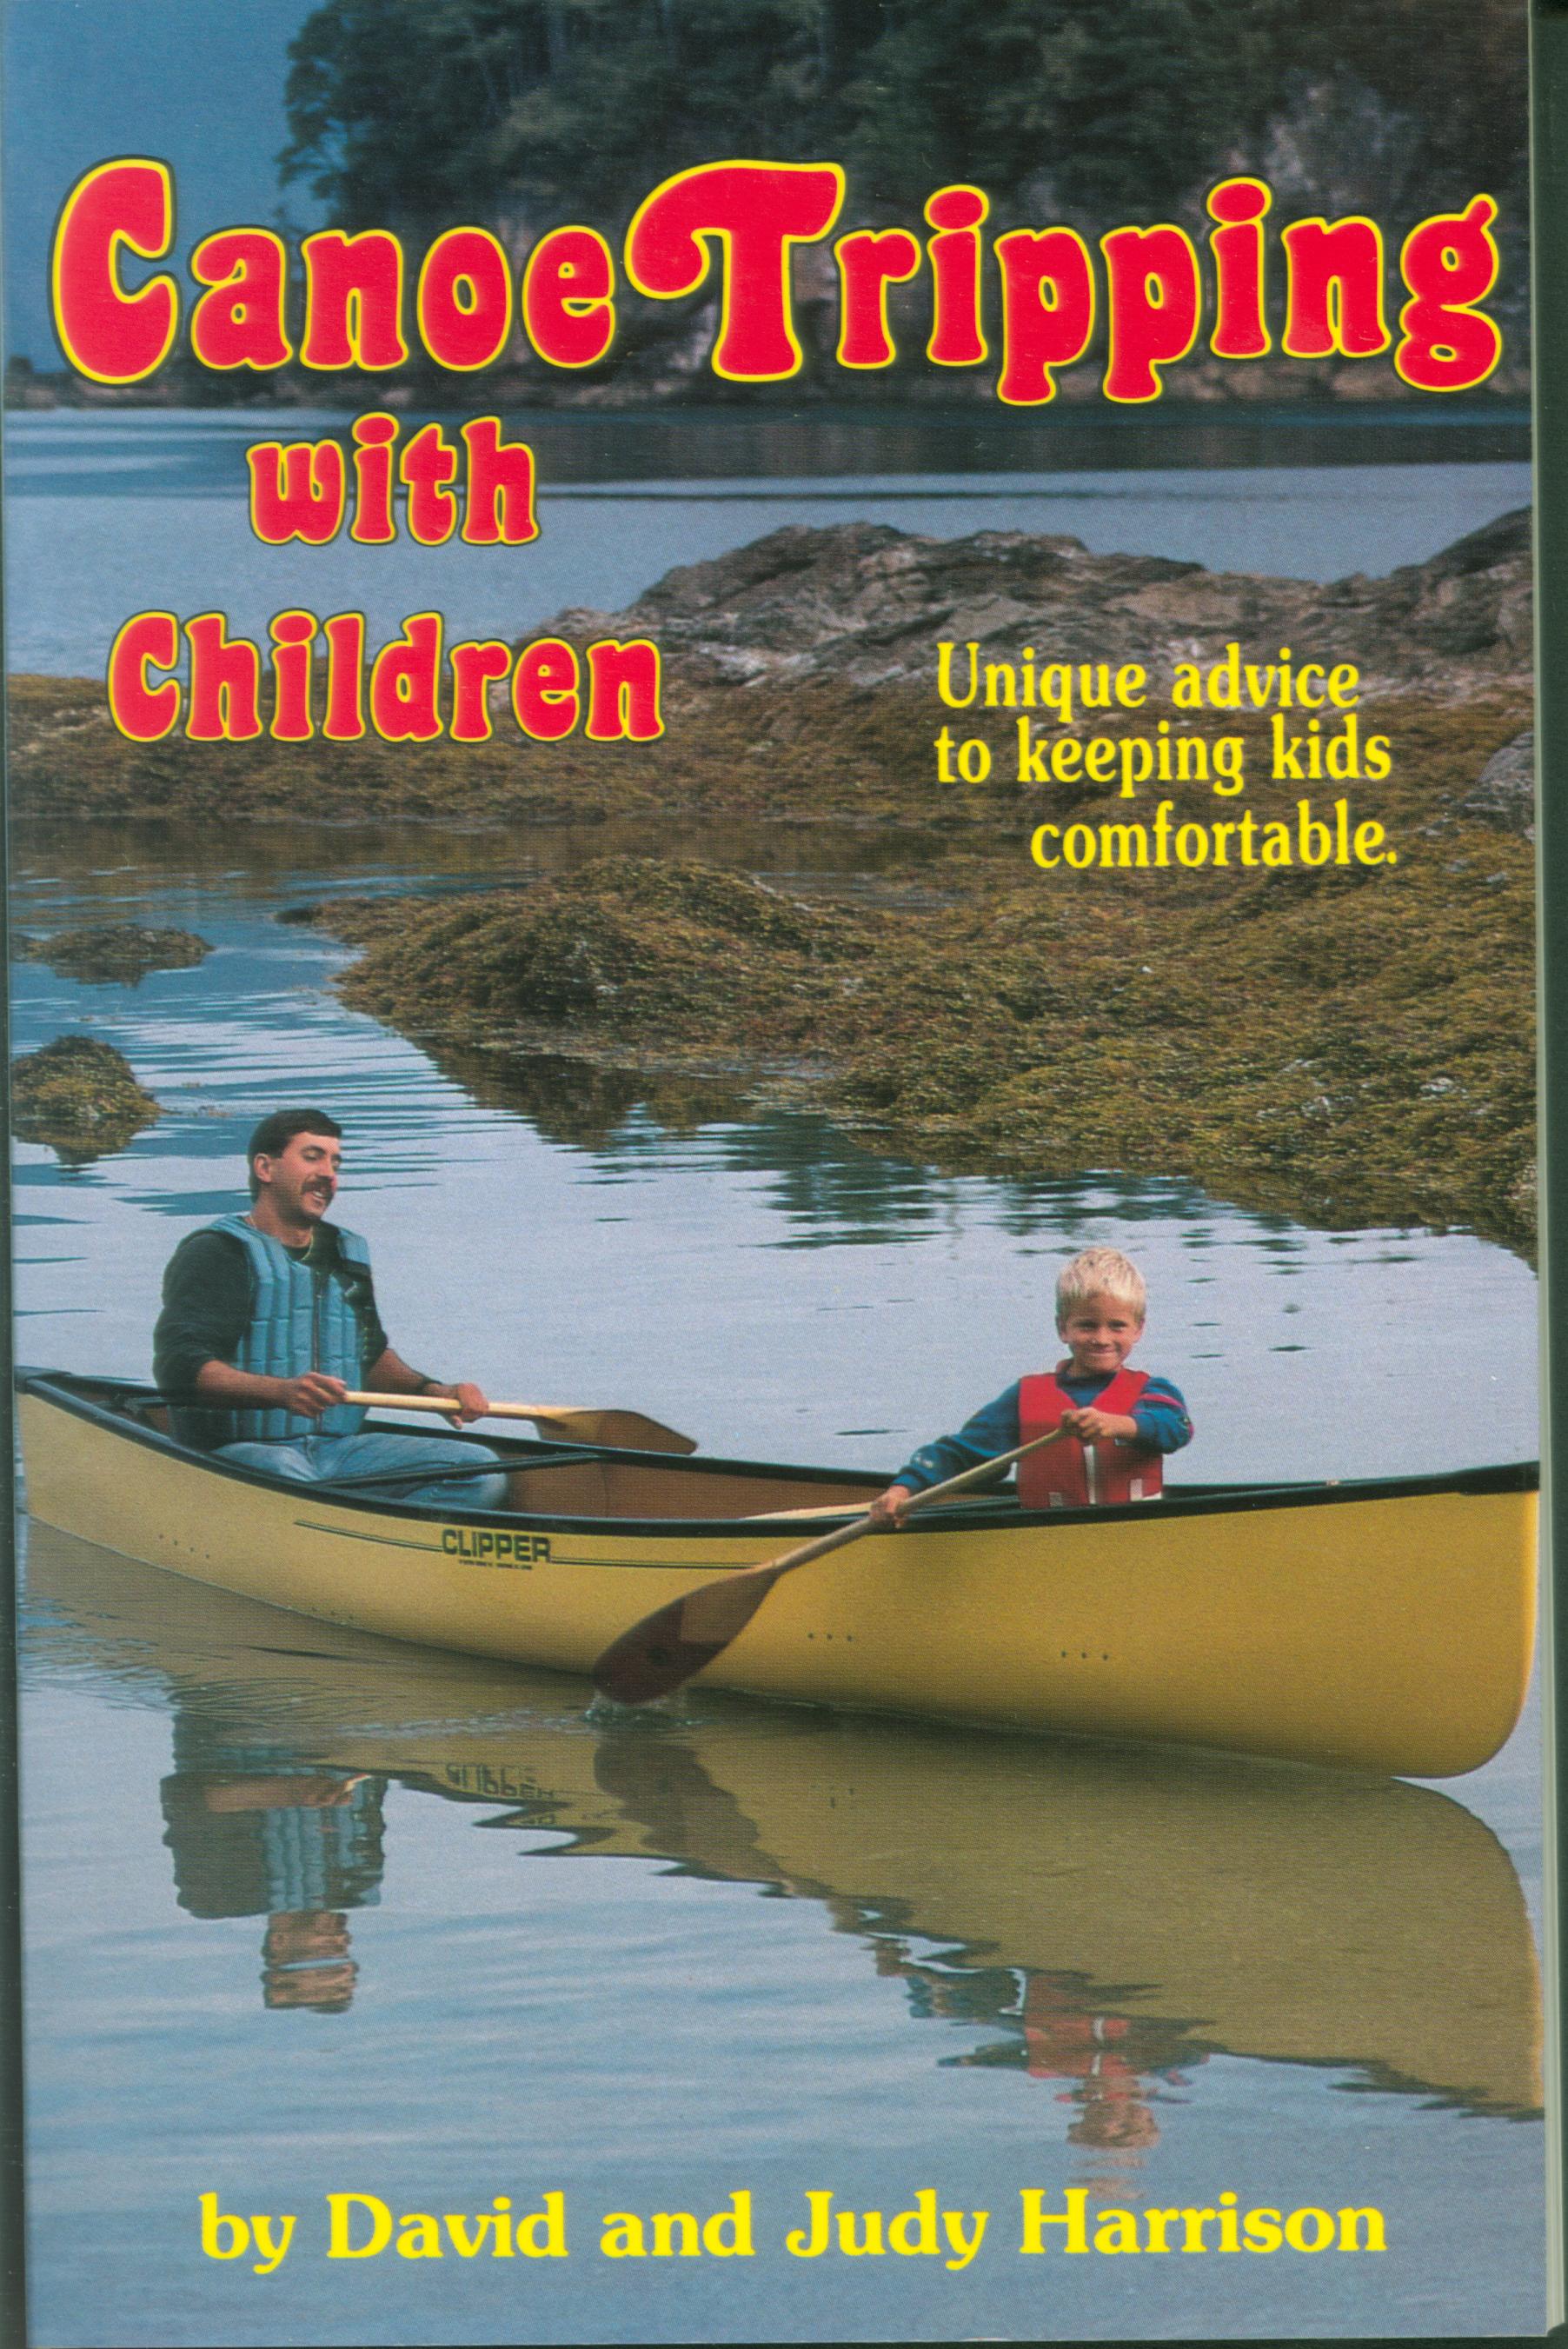 CANOE TRIPPING WITH CHILDREN: unique advice to keeping kids comfortable.